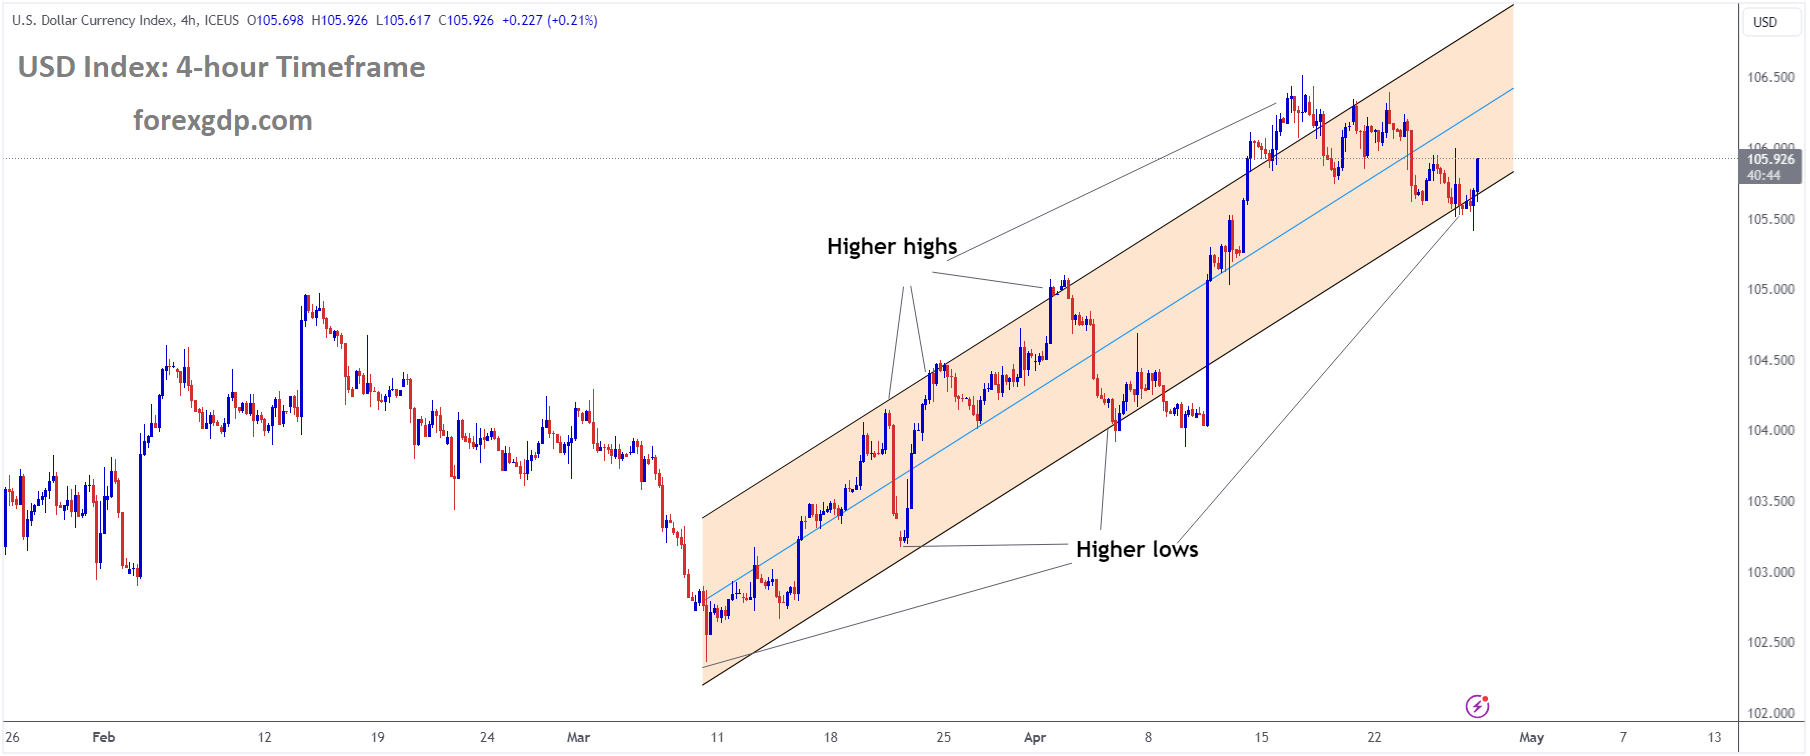 USD Index Market Price is moving in Ascending channel and market has reached higher low area of the channel